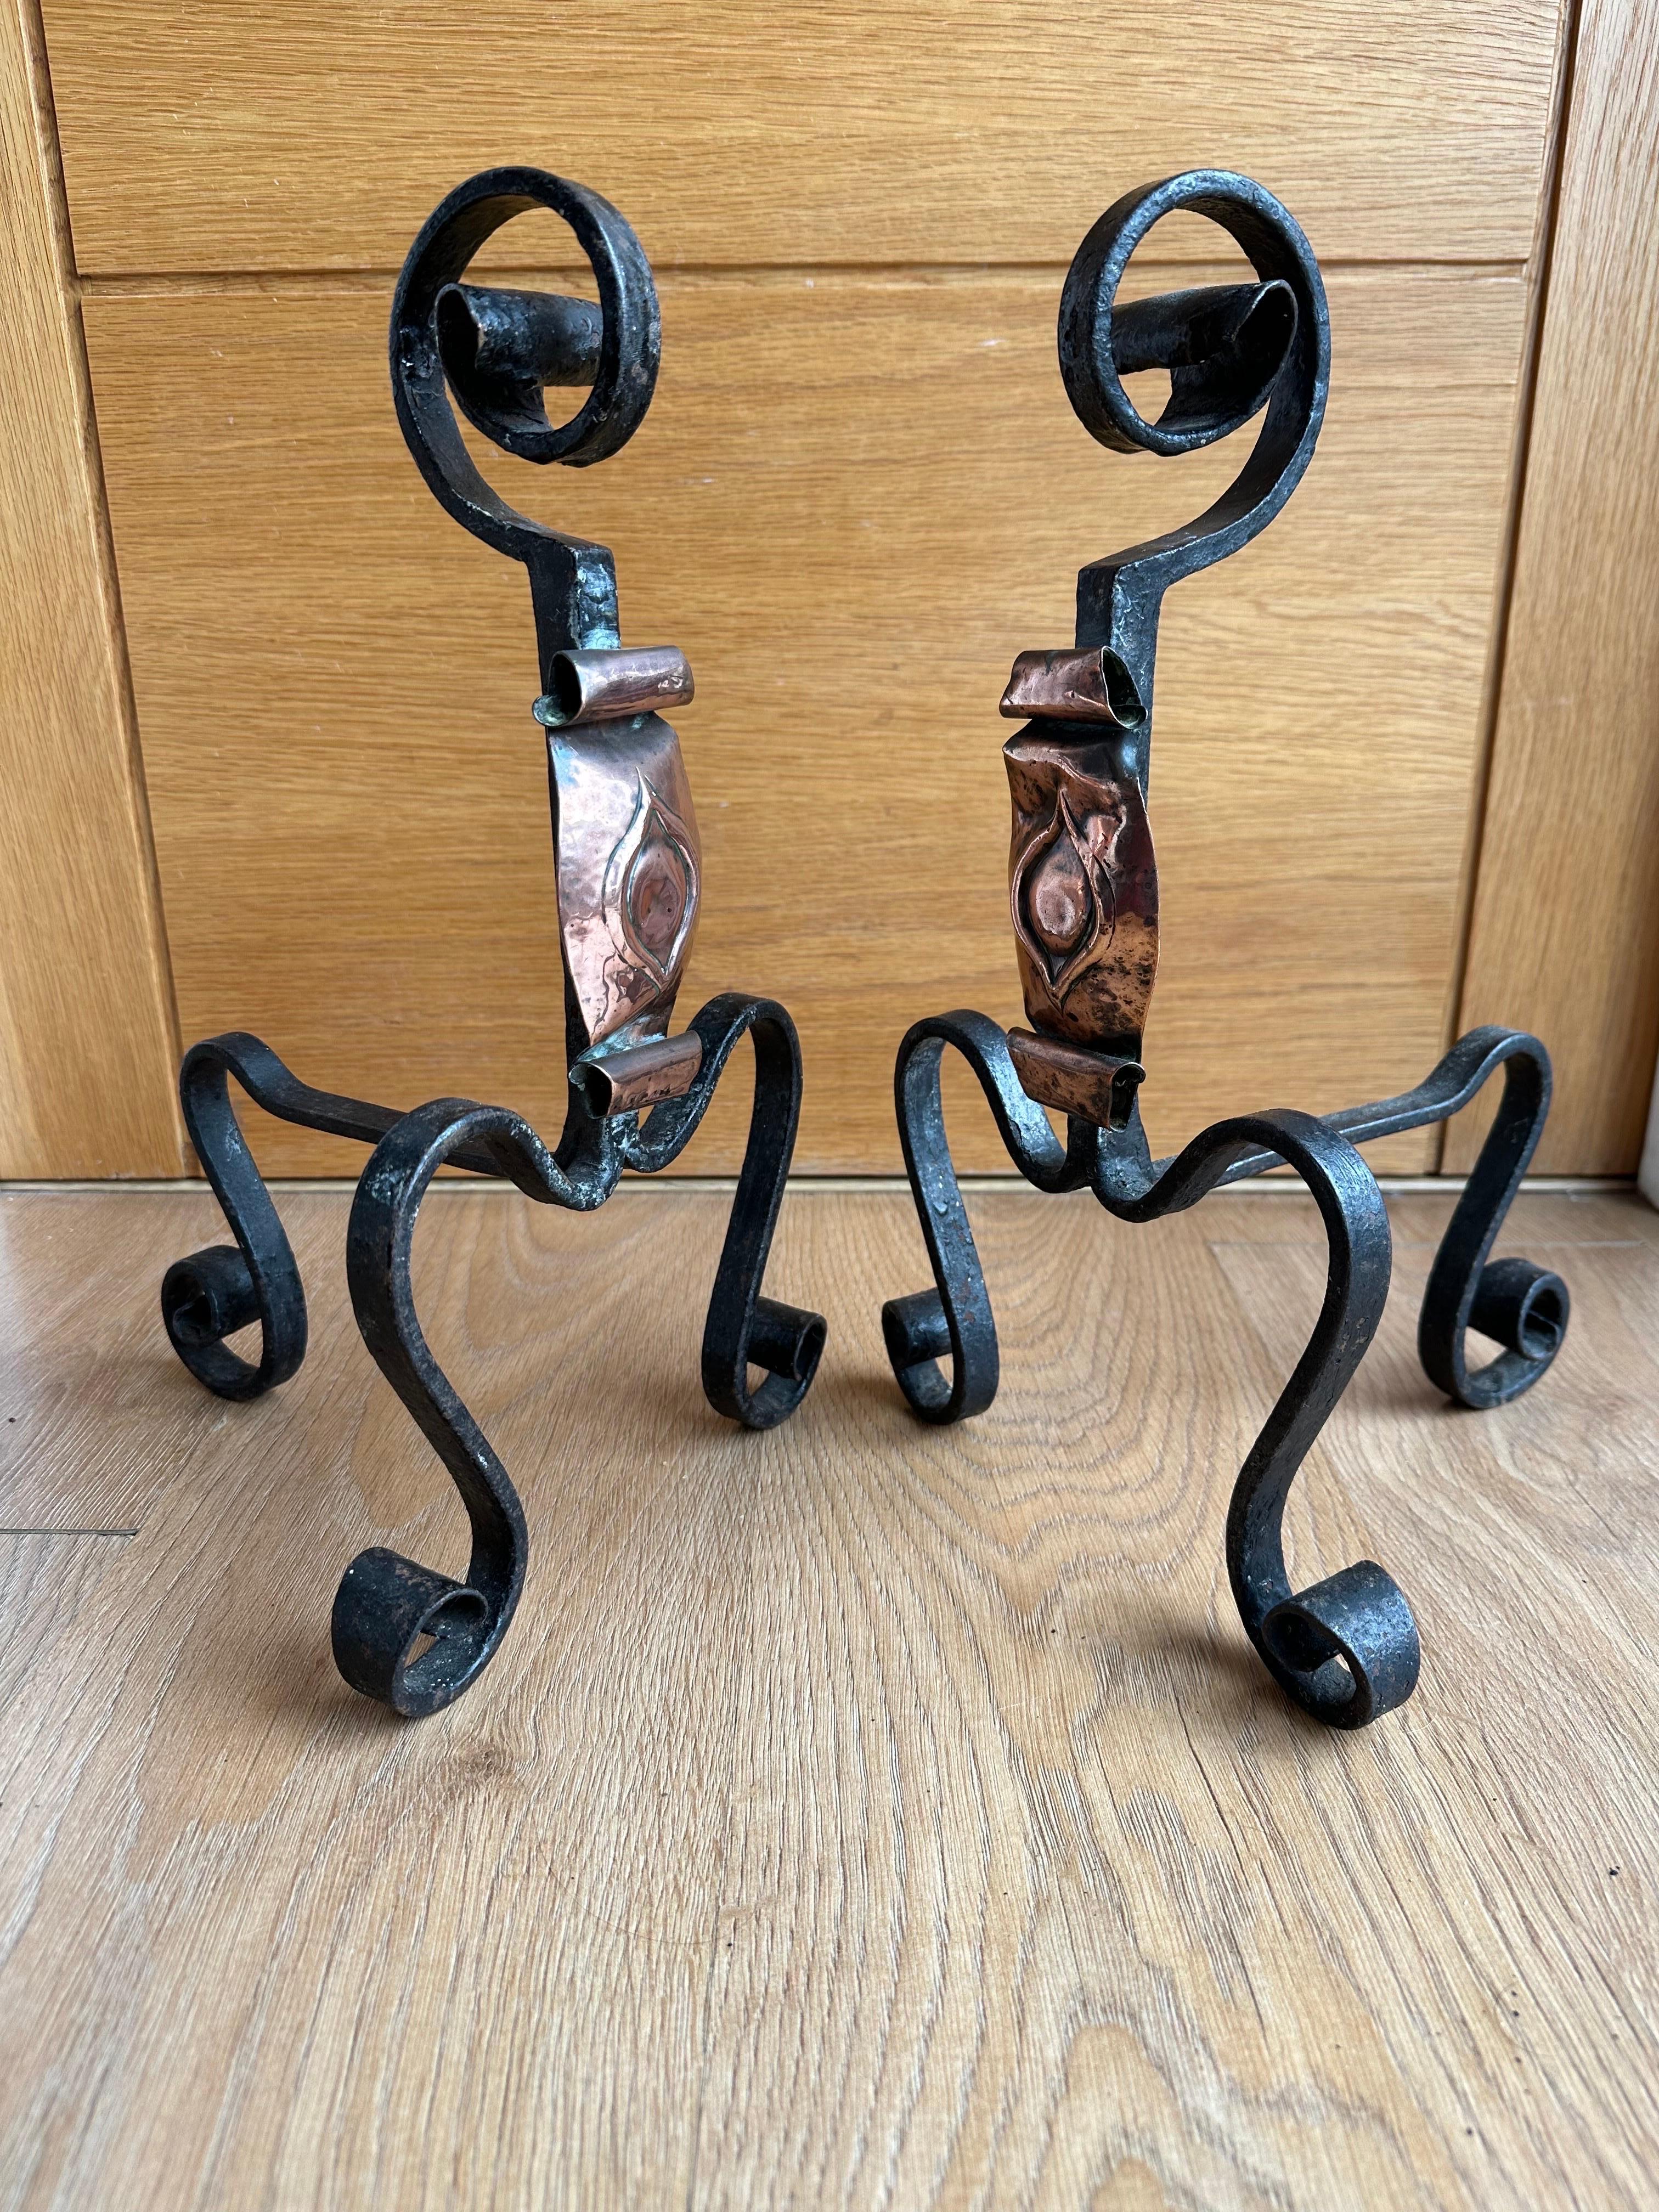 European Handwrought Iron and Copper Gothic Fireplace Andirons Firedogs, 19th Century For Sale